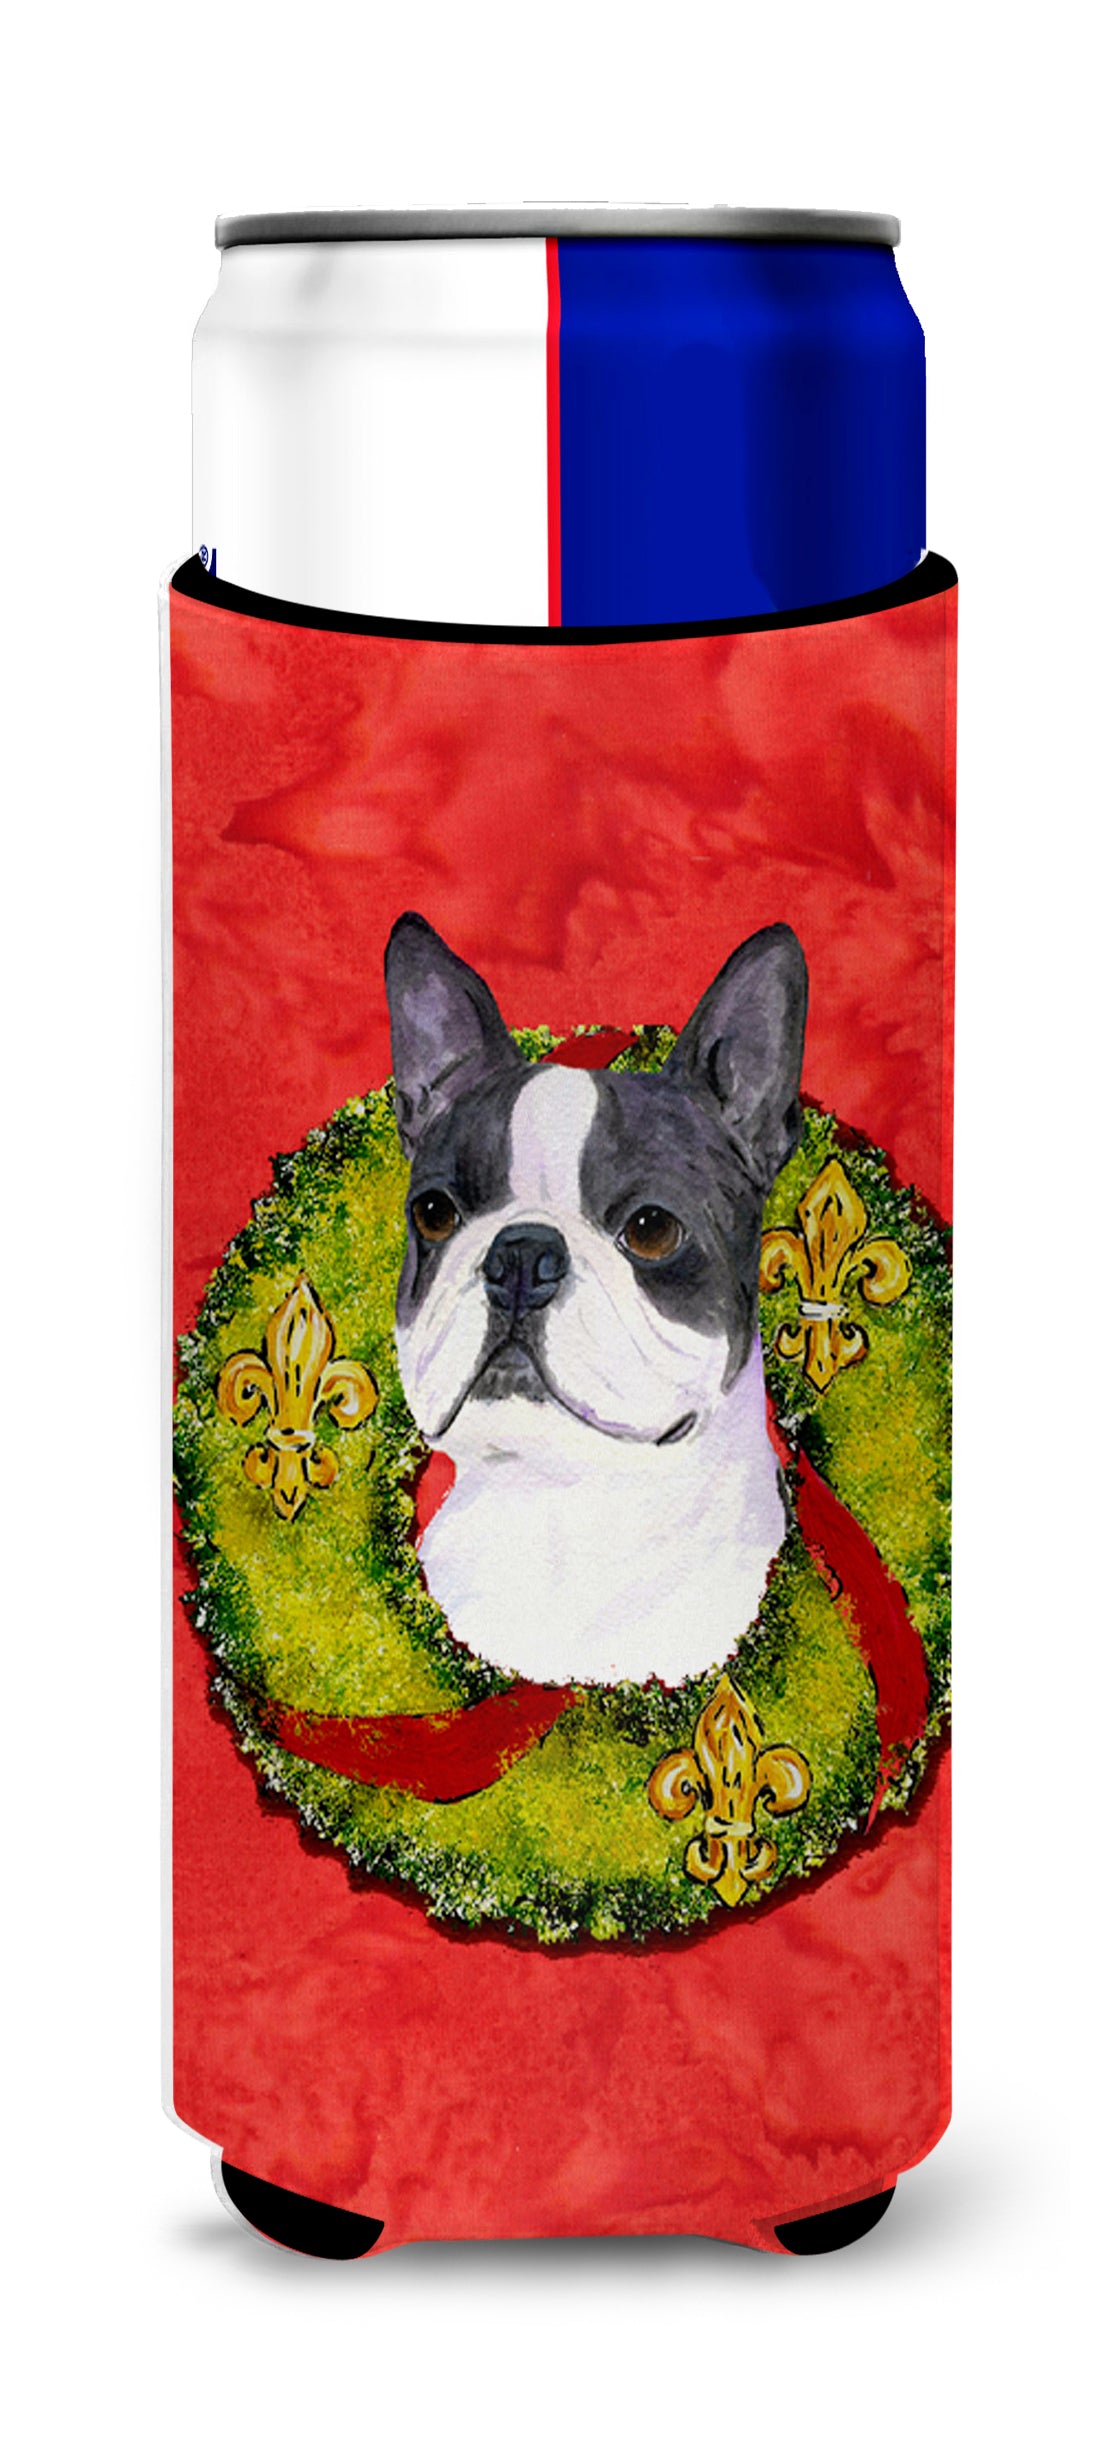 Boston Terrier Cristmas Wreath Ultra Beverage Insulators for slim cans SS4203MUK